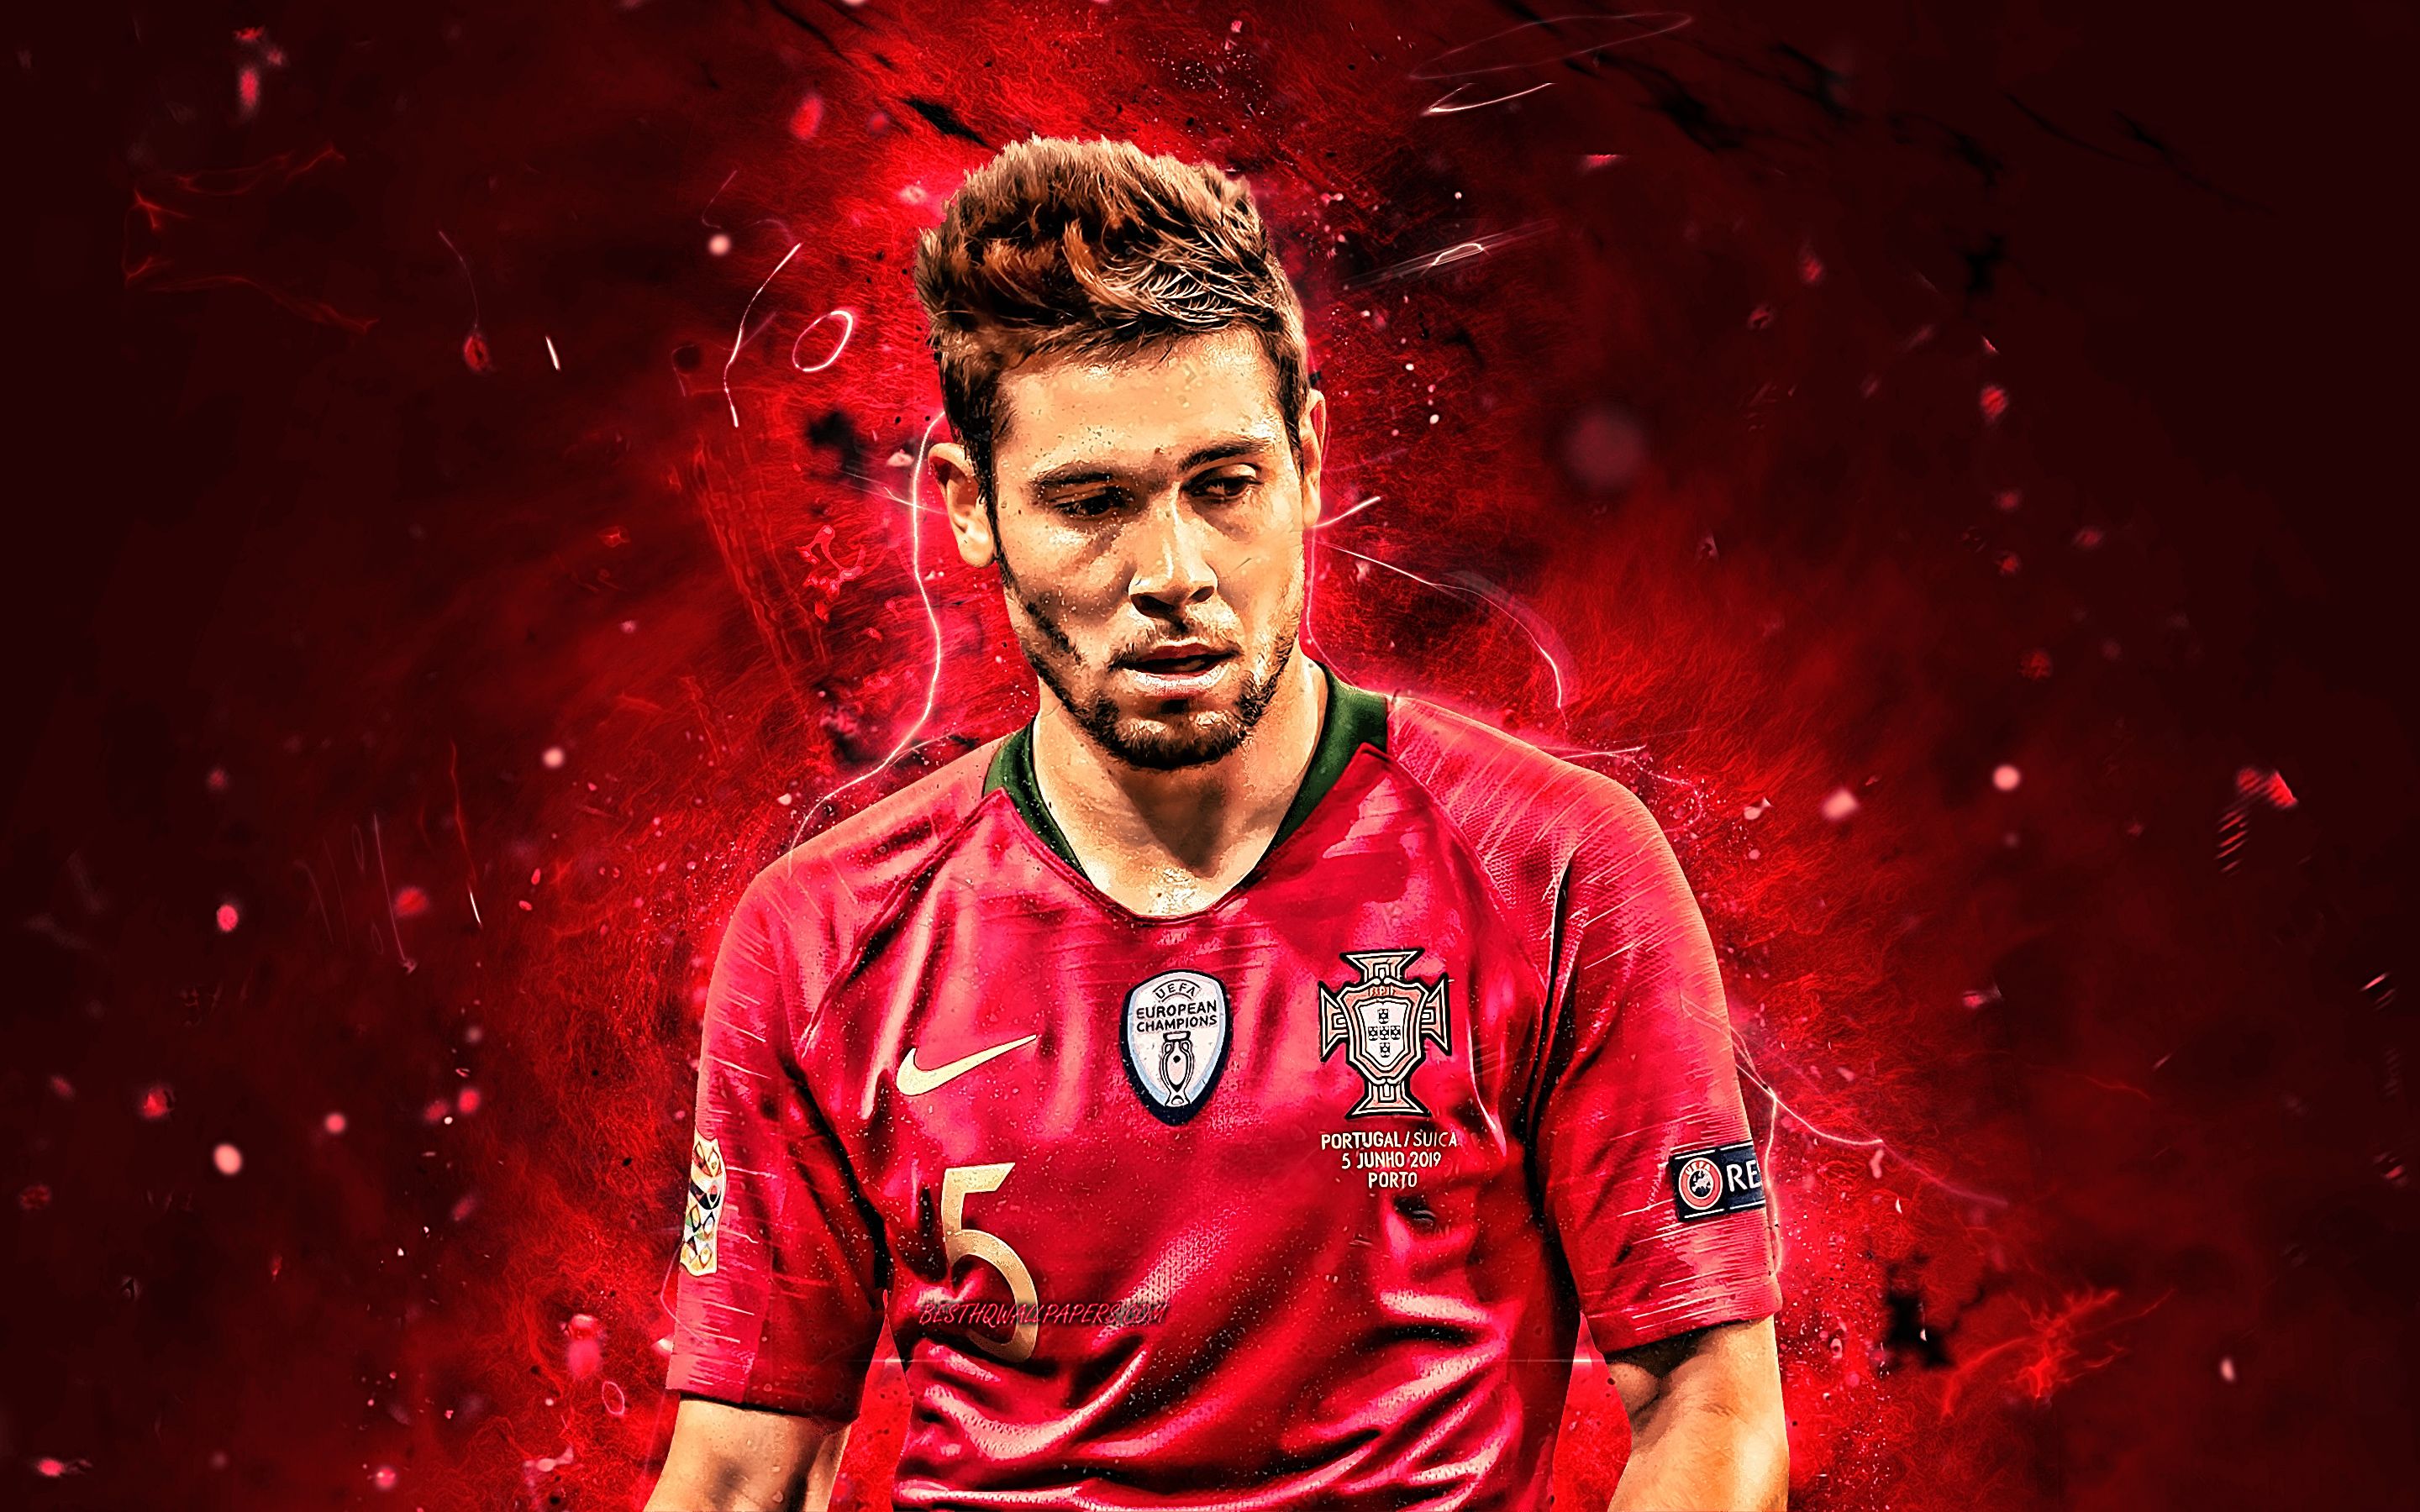 Download Wallpaper Raphael Guerreiro, Close Up, Portugal National Team, Soccer, Raphael Adelino Jose Guerreiro, Footballers, Neon Lights, Portuguese Football Team For Desktop With Resolution 2880x1800. High Quality HD Picture Wallpaper